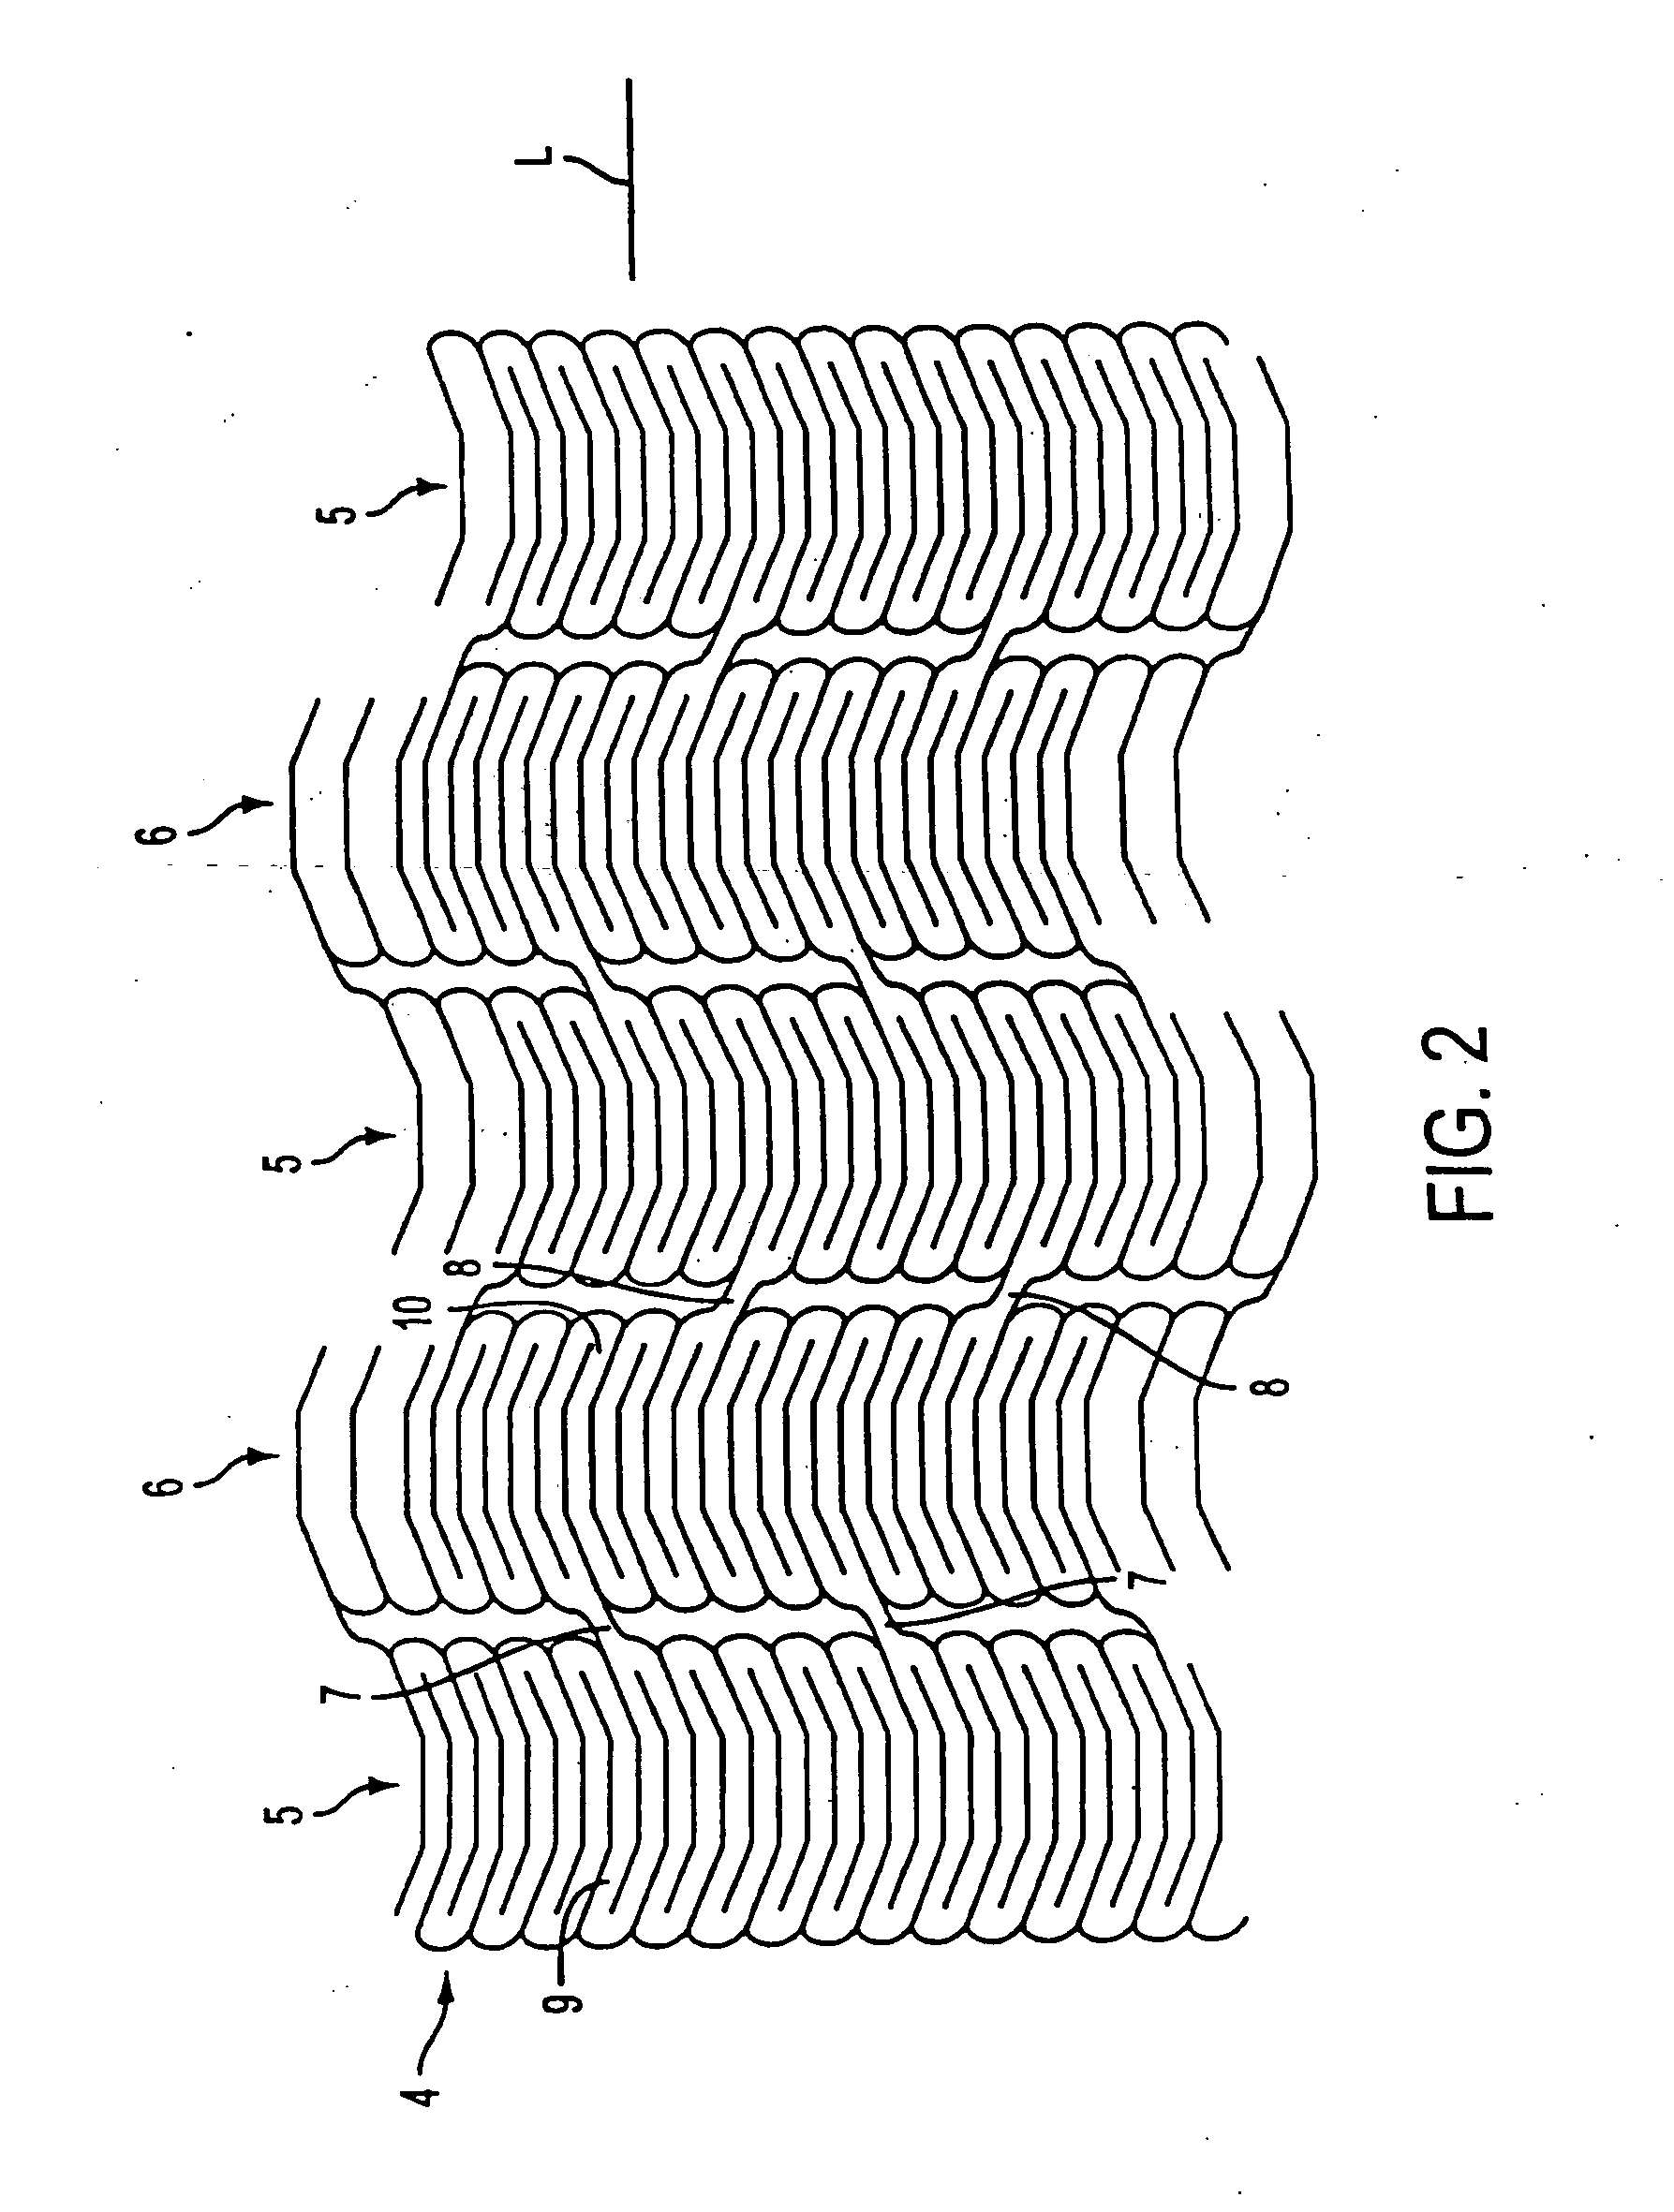 Methods and apparatus for a stent having an expandable web structure